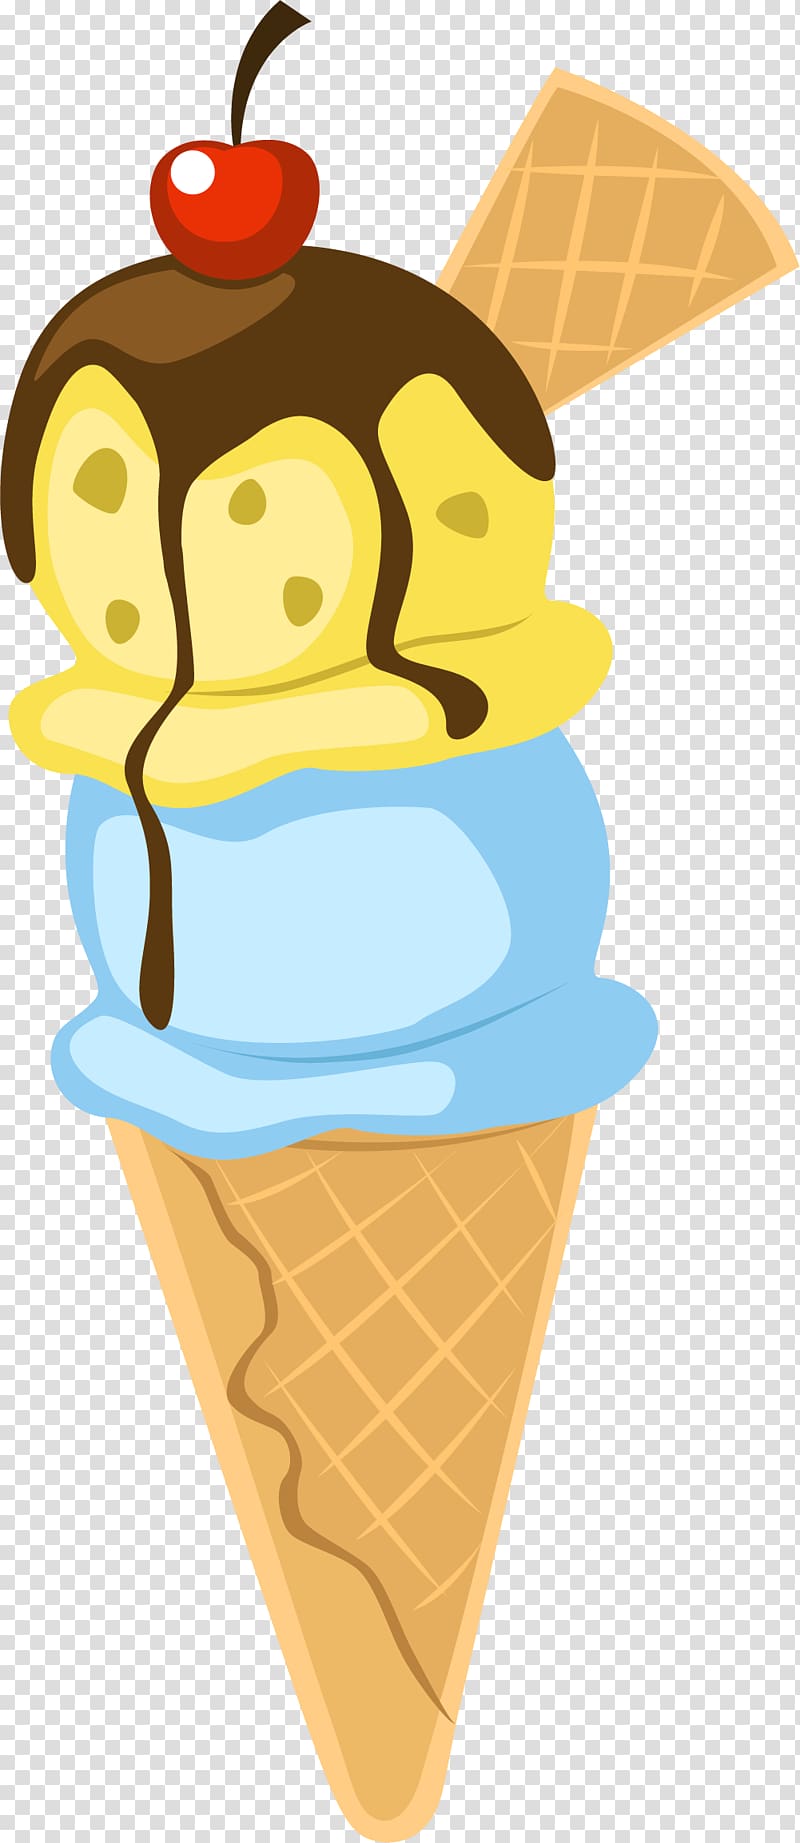 Samsung Galaxy S III Mini iPhone 5s iPhone 5c Samsung Galaxy Ace 4 Samsung Galaxy Grand, Cartoon gourmet ice cream transparent background PNG clipart